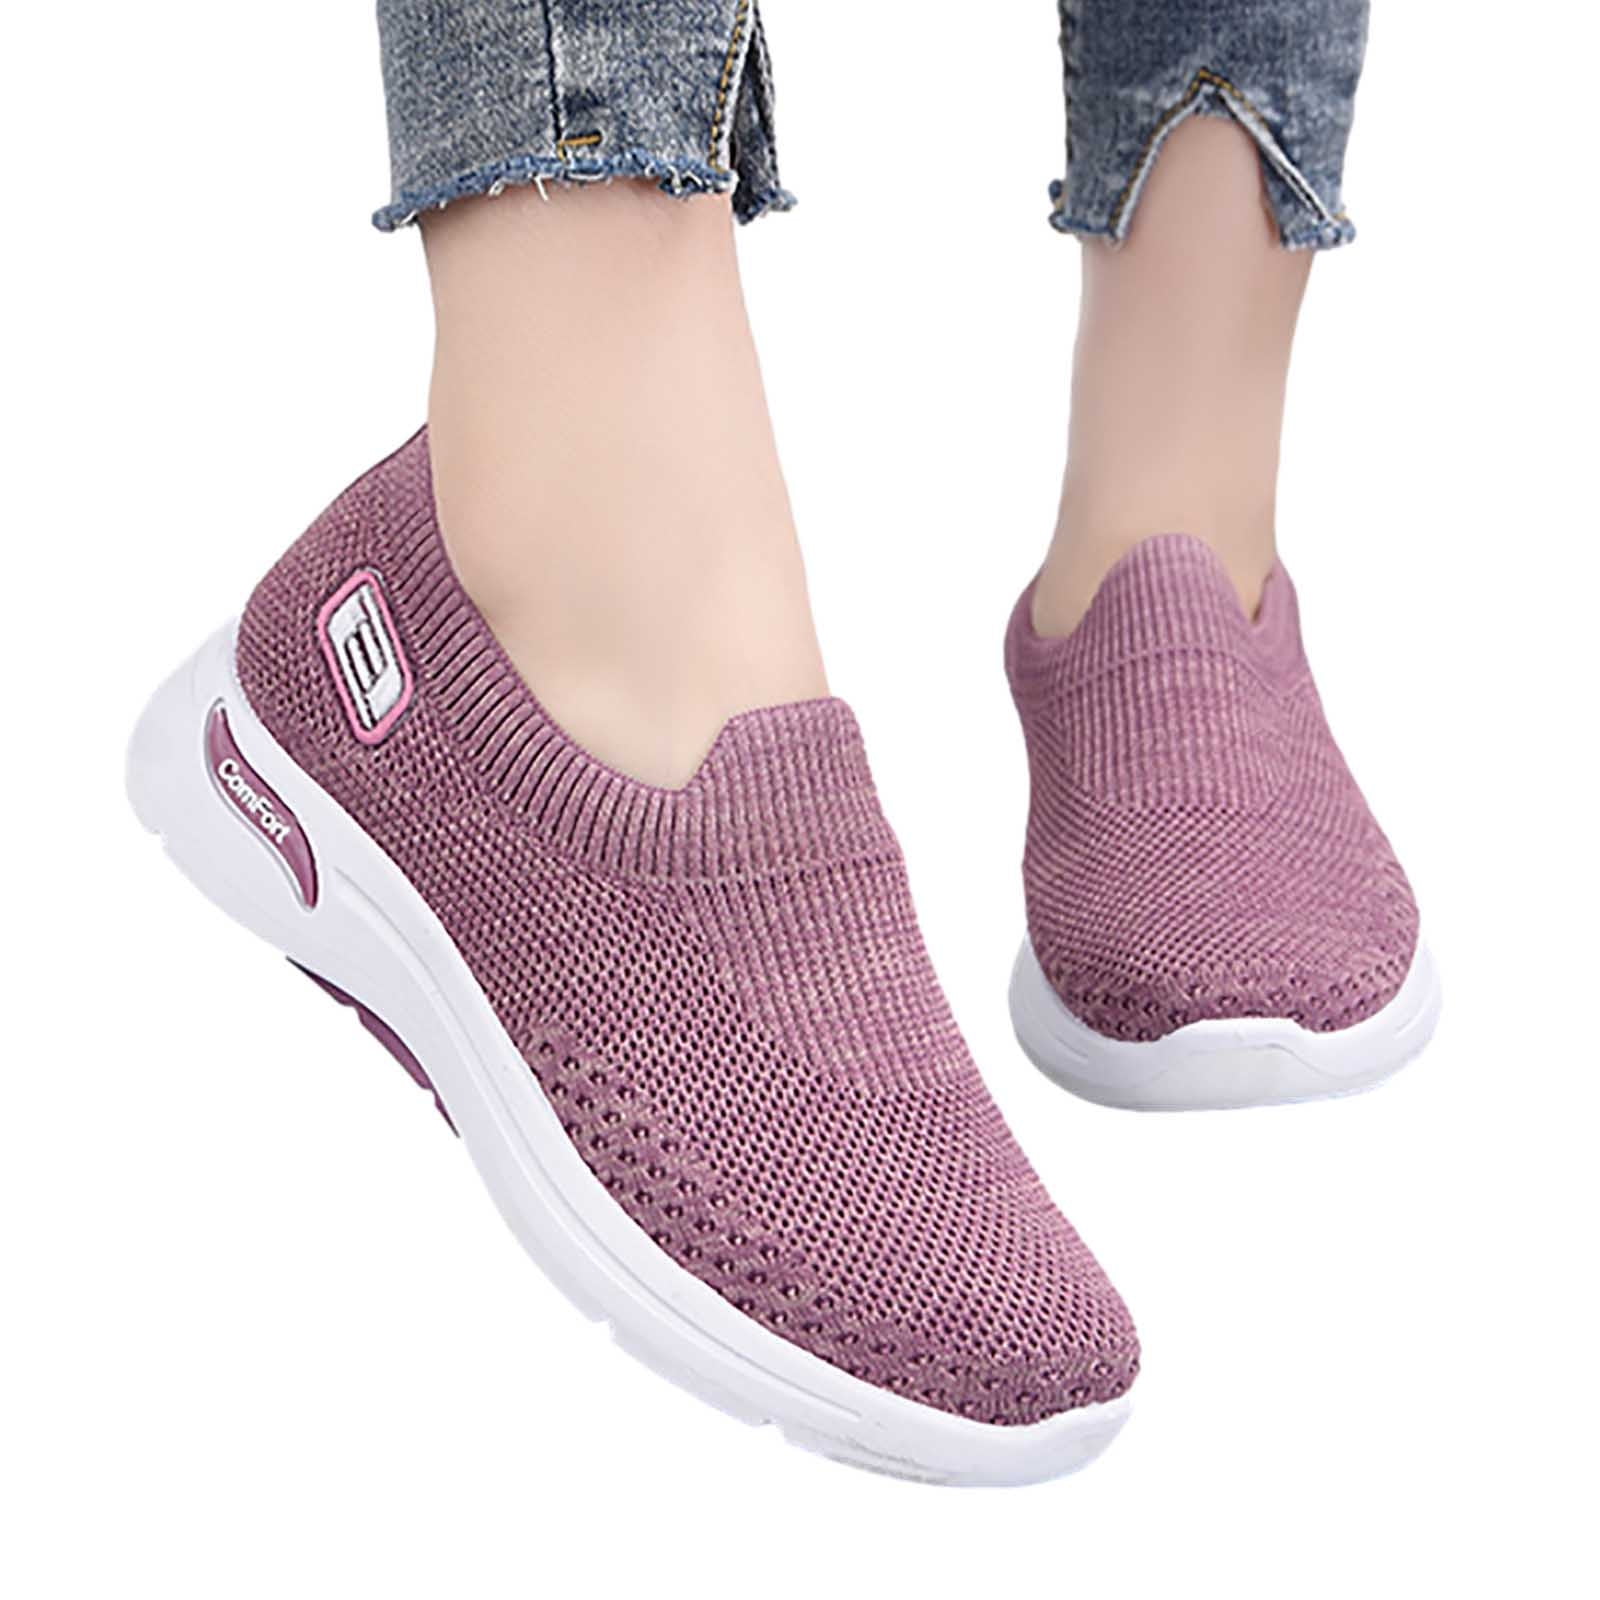 Black and Friday Deals Womens Clearance asdoklhq Womens Casual Shoes, Women  Shoe Soft-soled Comfortable Flying Woven Casual Ladies Shoes 